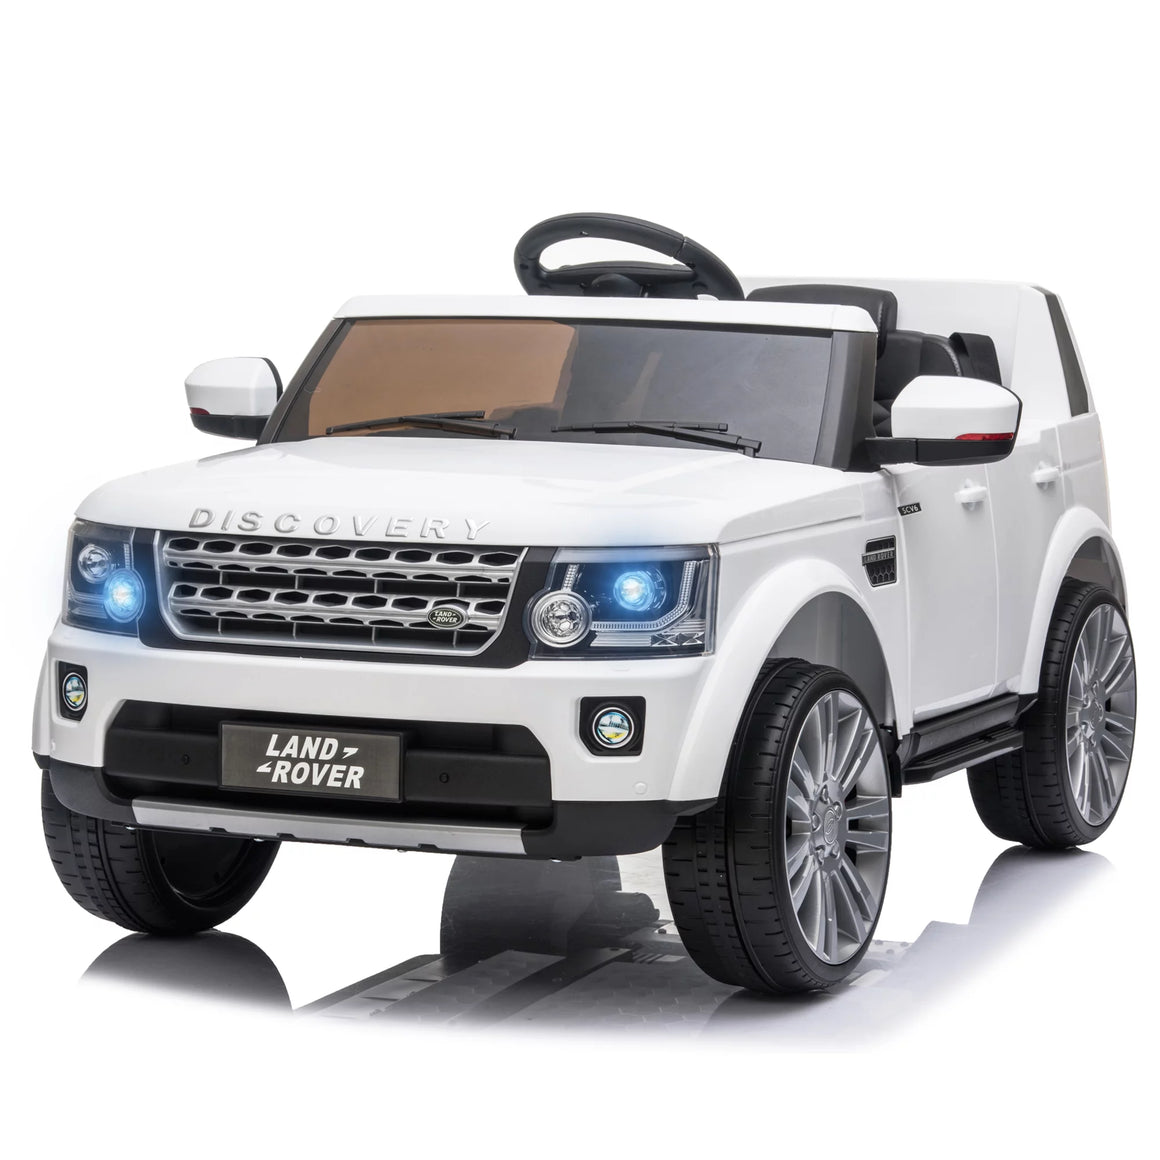 Licensed Land Rover Discovery 12 V Battery Powered Ride on Cars with Remote Control, 3 Speeds, LED Lights, MP3 Player, Kids Electric Vehicle Ride on Toys for Boys Girls